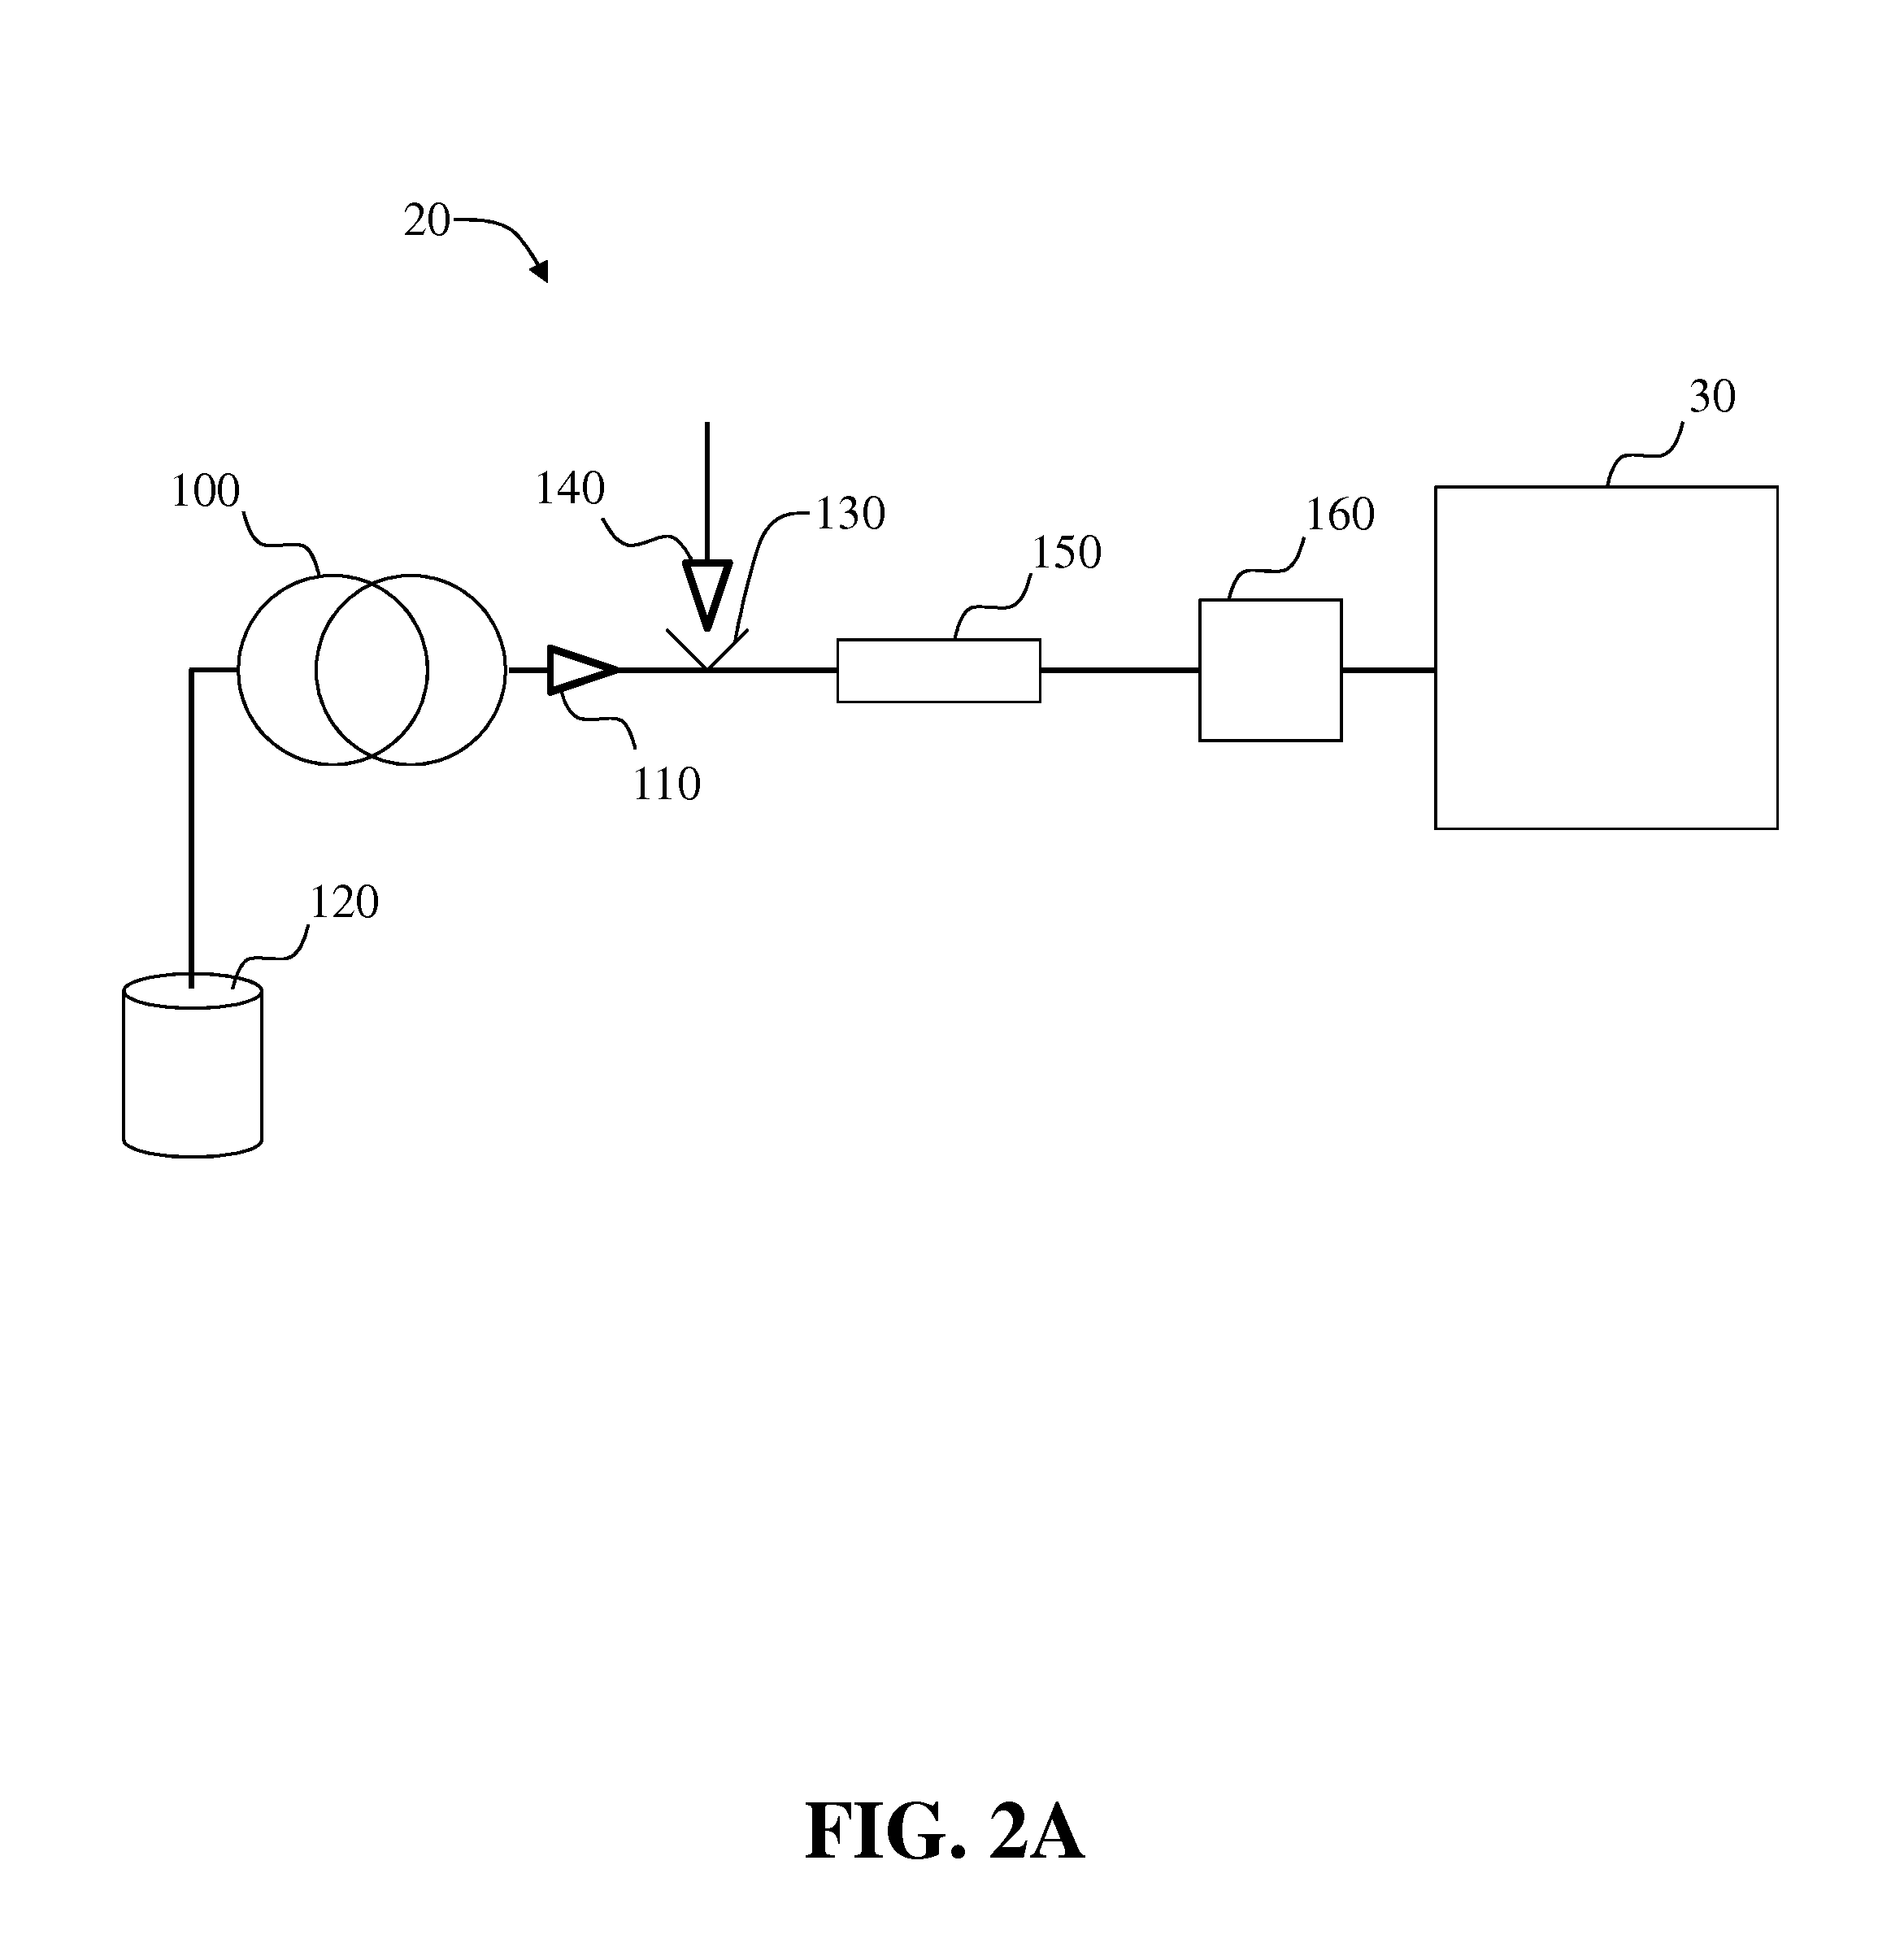 Systems and methods for two-dimensional chromatography